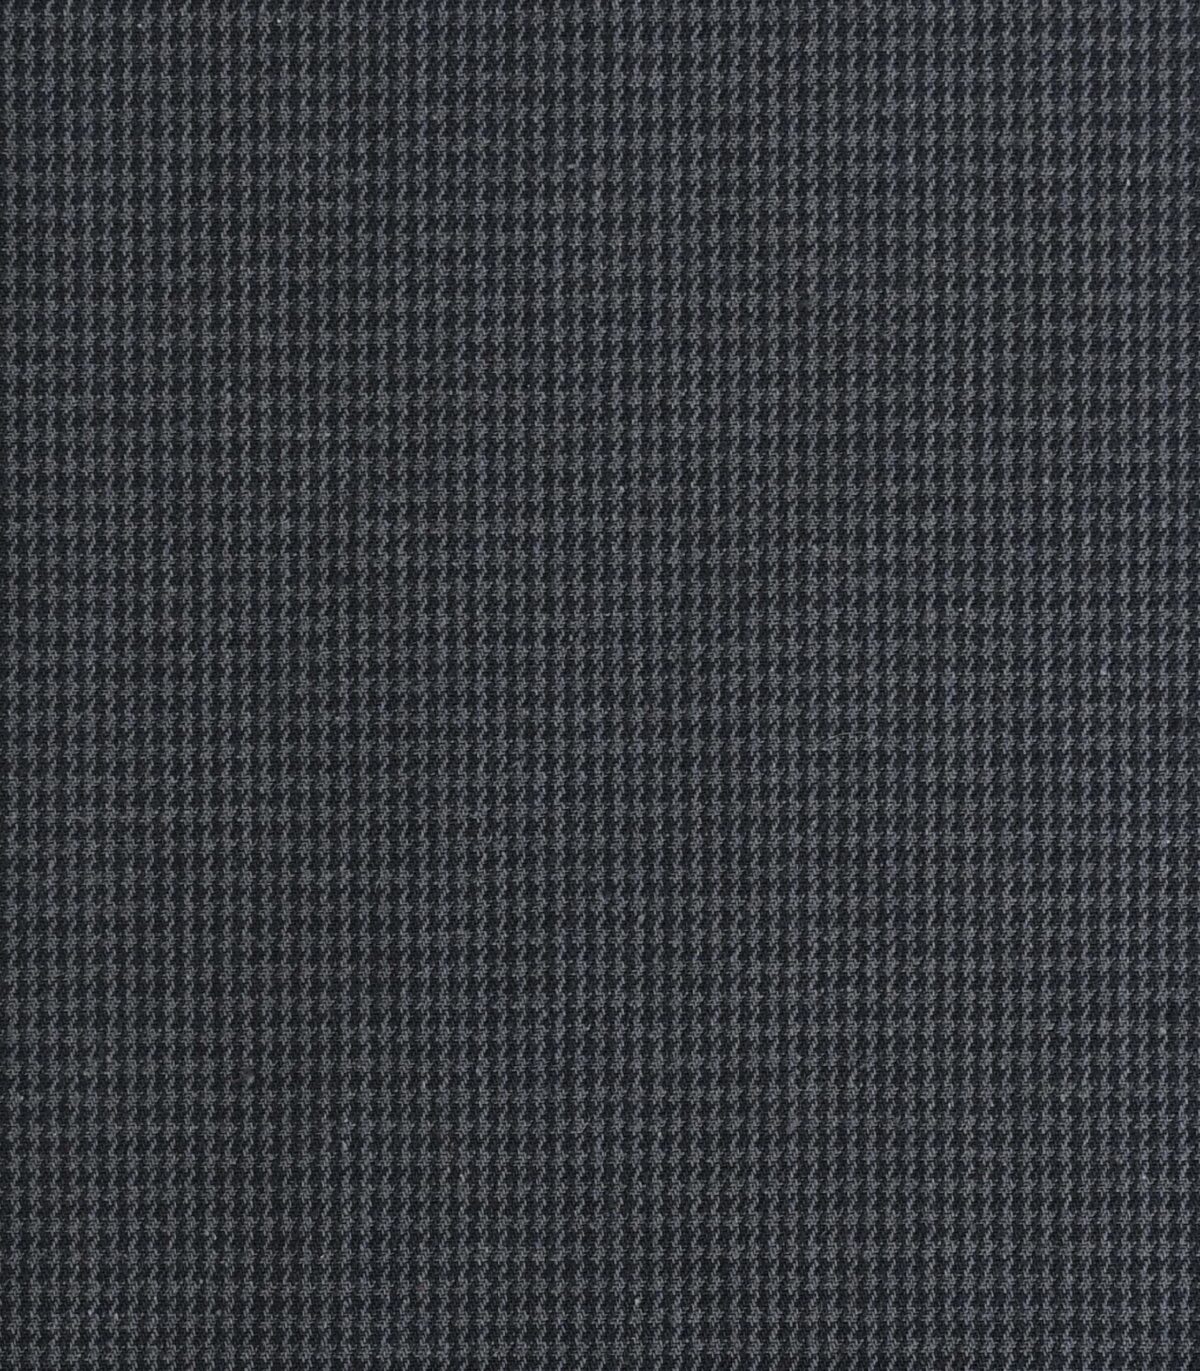 Cotton Lycra Yarn Dyed Houndstooth Fabric